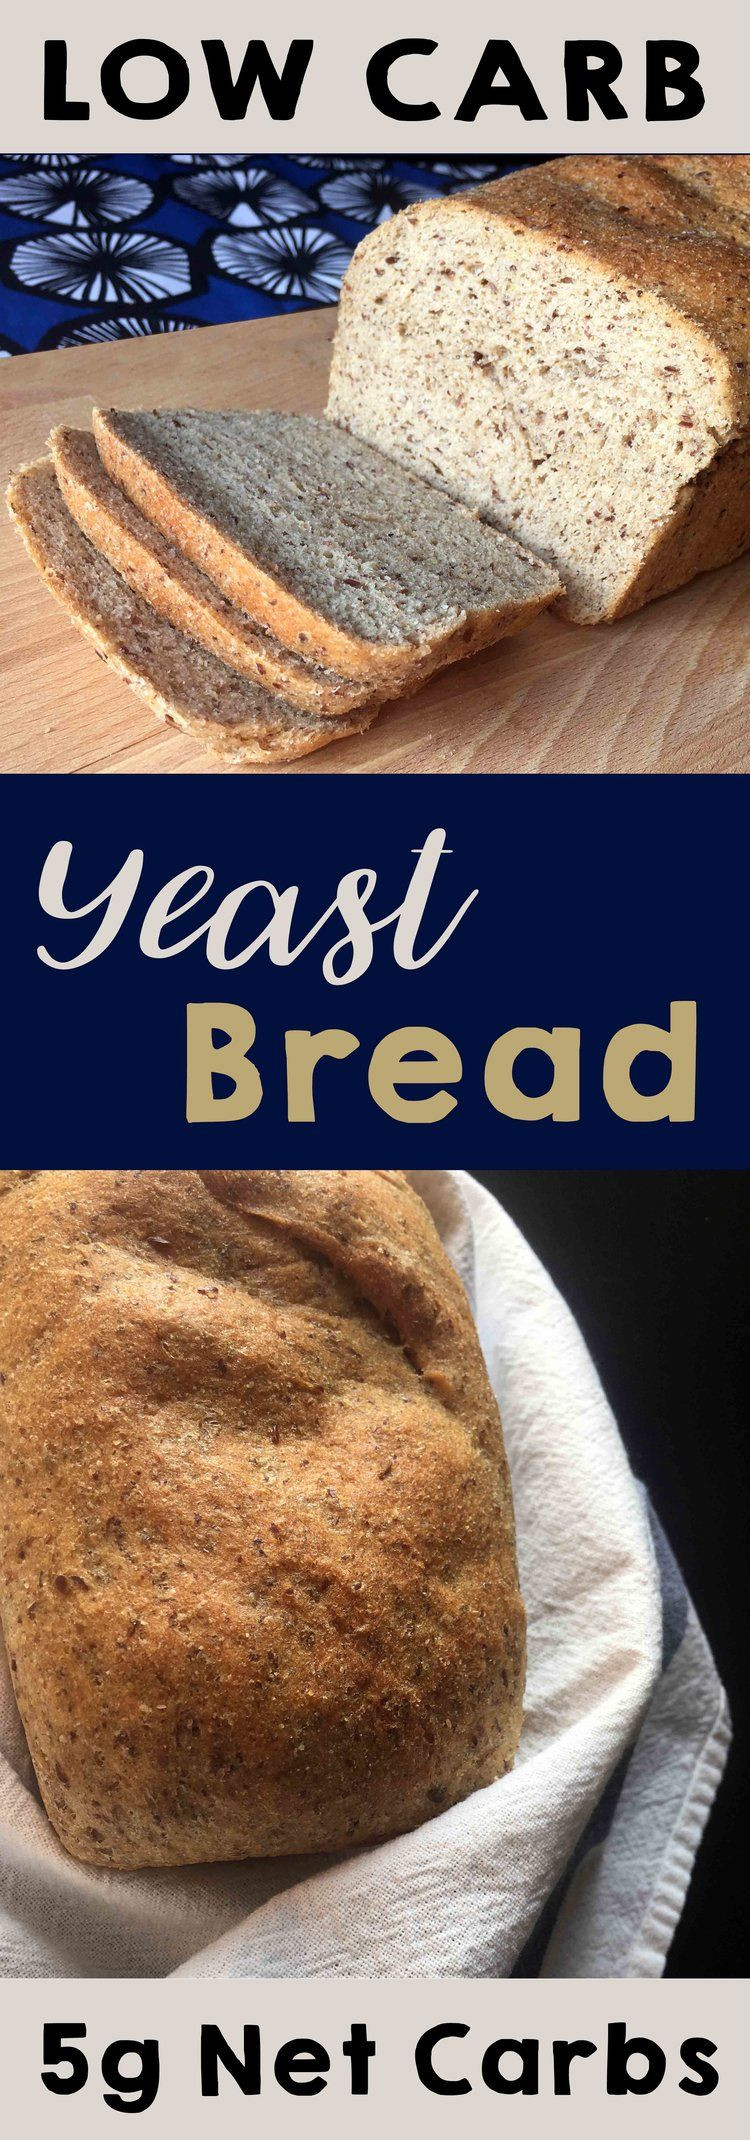 Low Carb Yeast Bread Recipe
 This recipe for low carb yeast bread is the perfect mix of